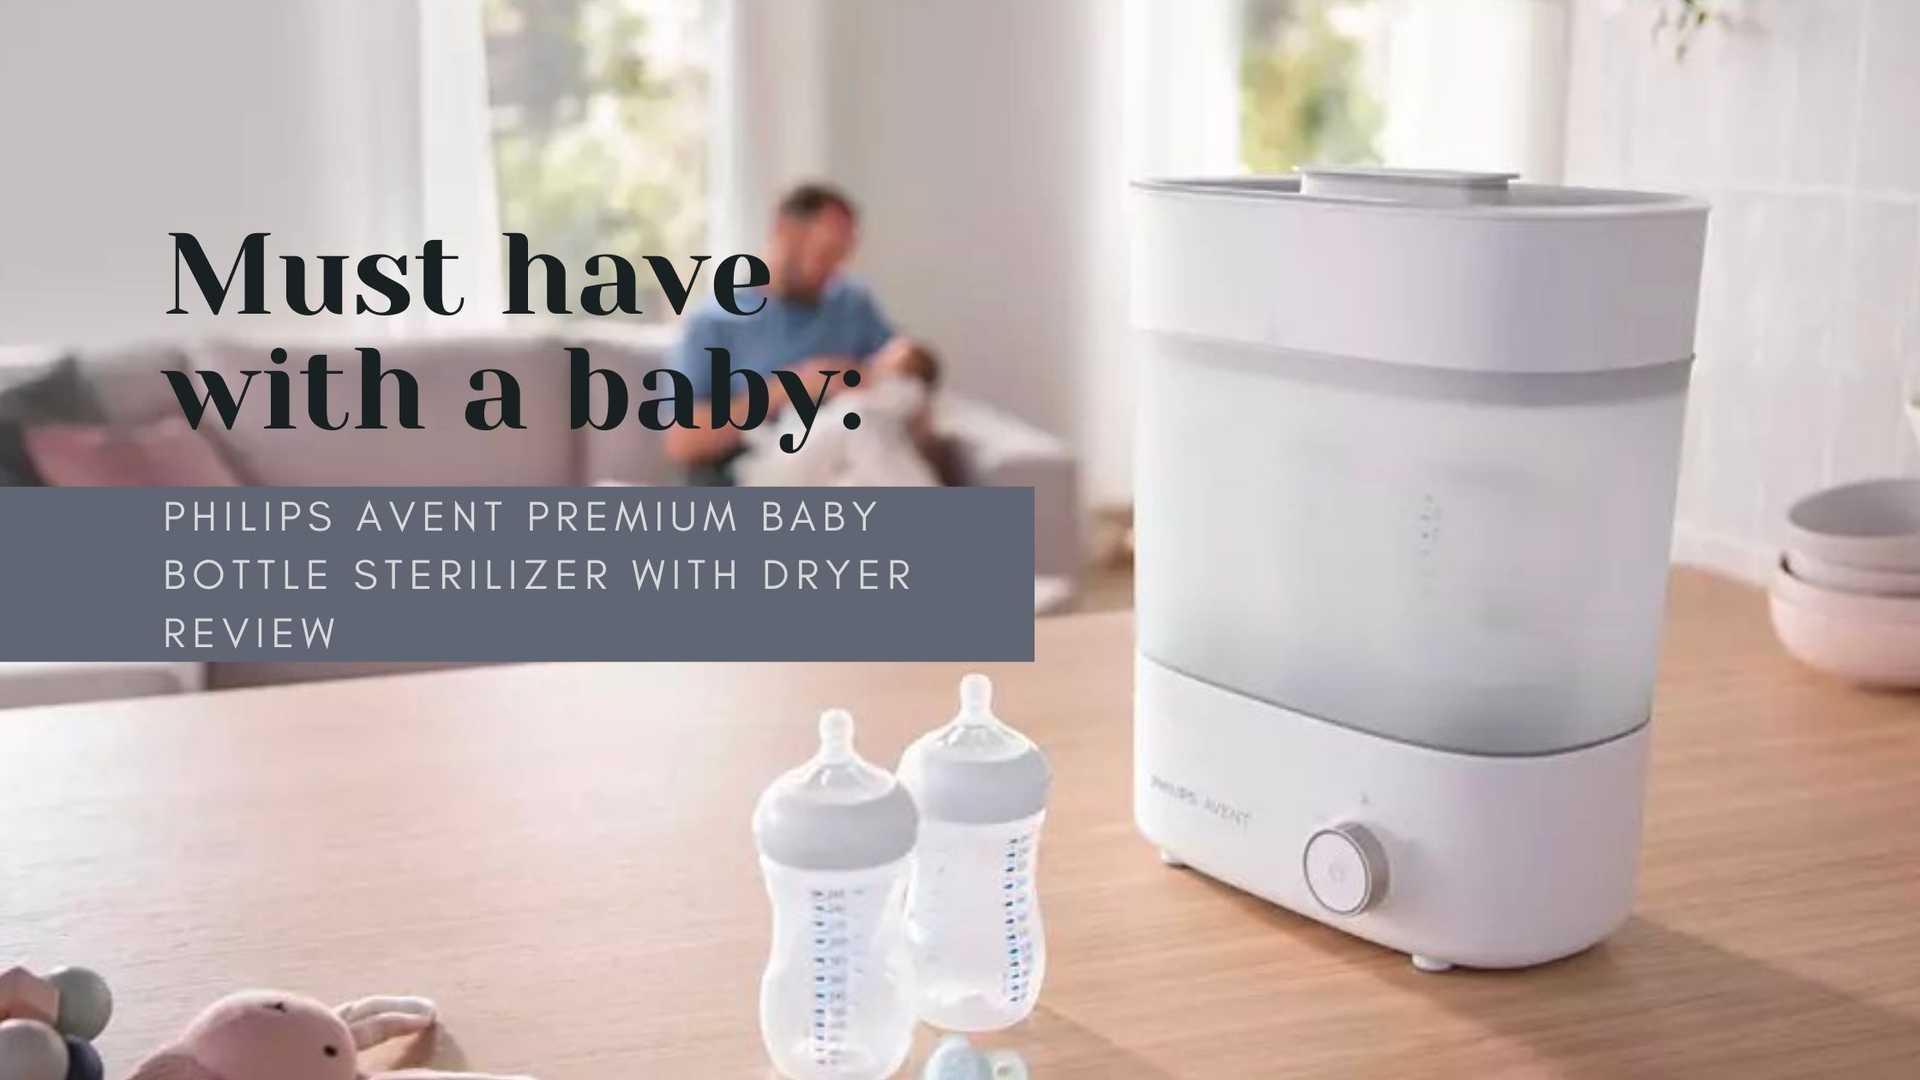 Must have with a baby: Philips AVENT Premium Baby Bottle Sterilizer with Dryer Review 2022